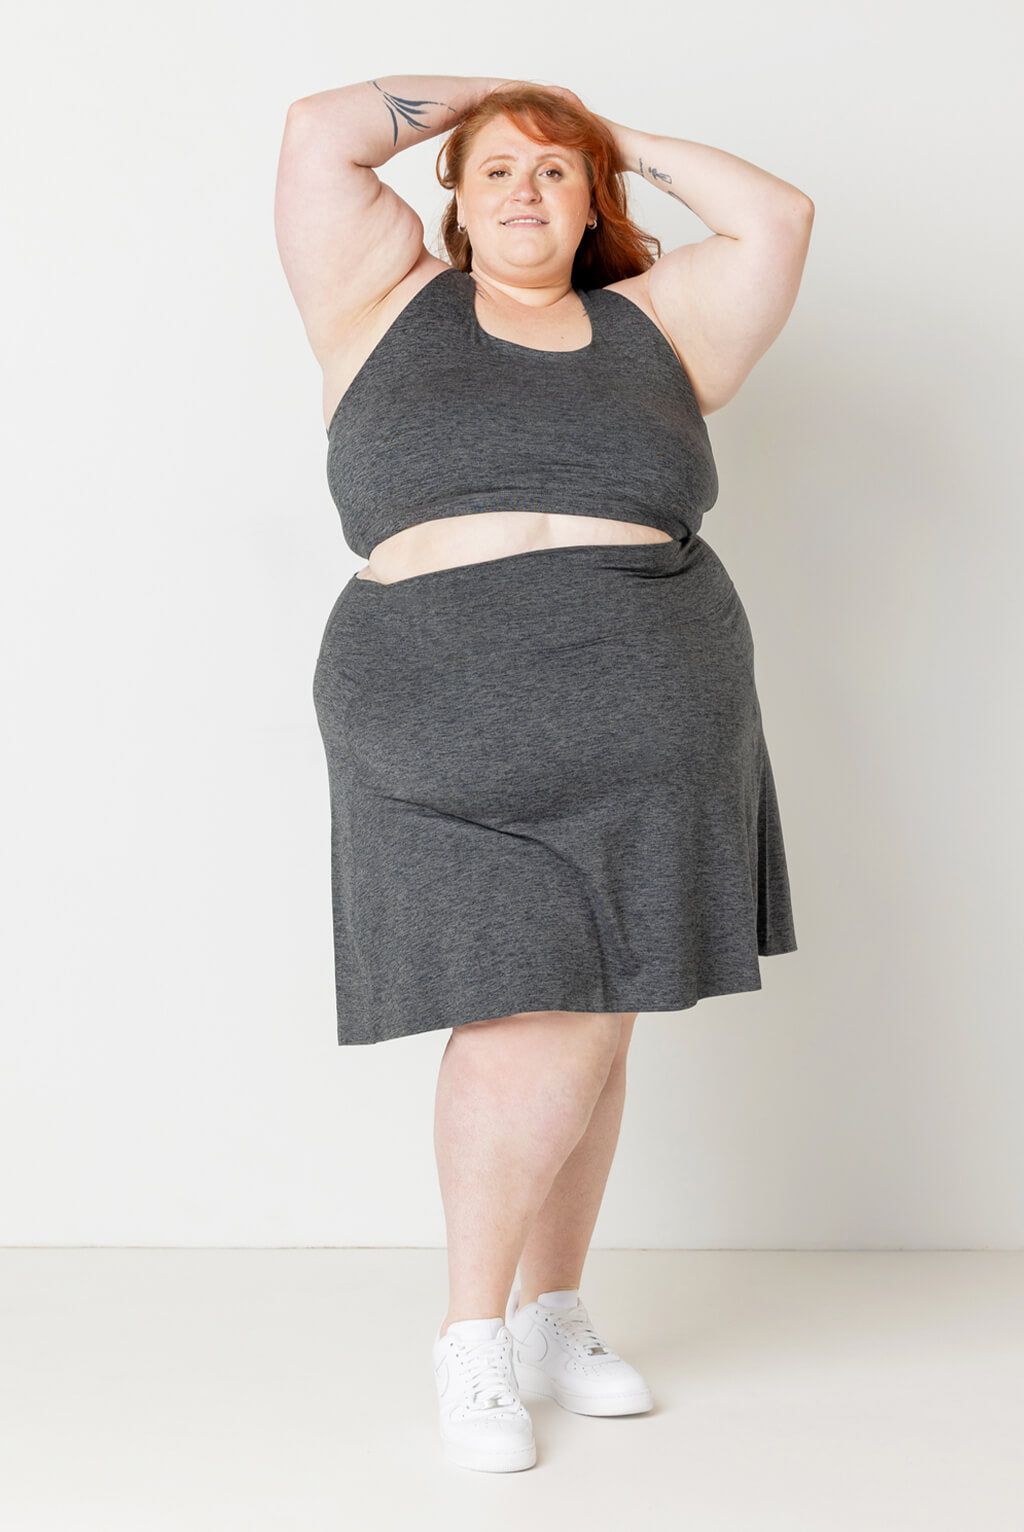 Plus Size model looks cute in SuperSoft Skort size 5X